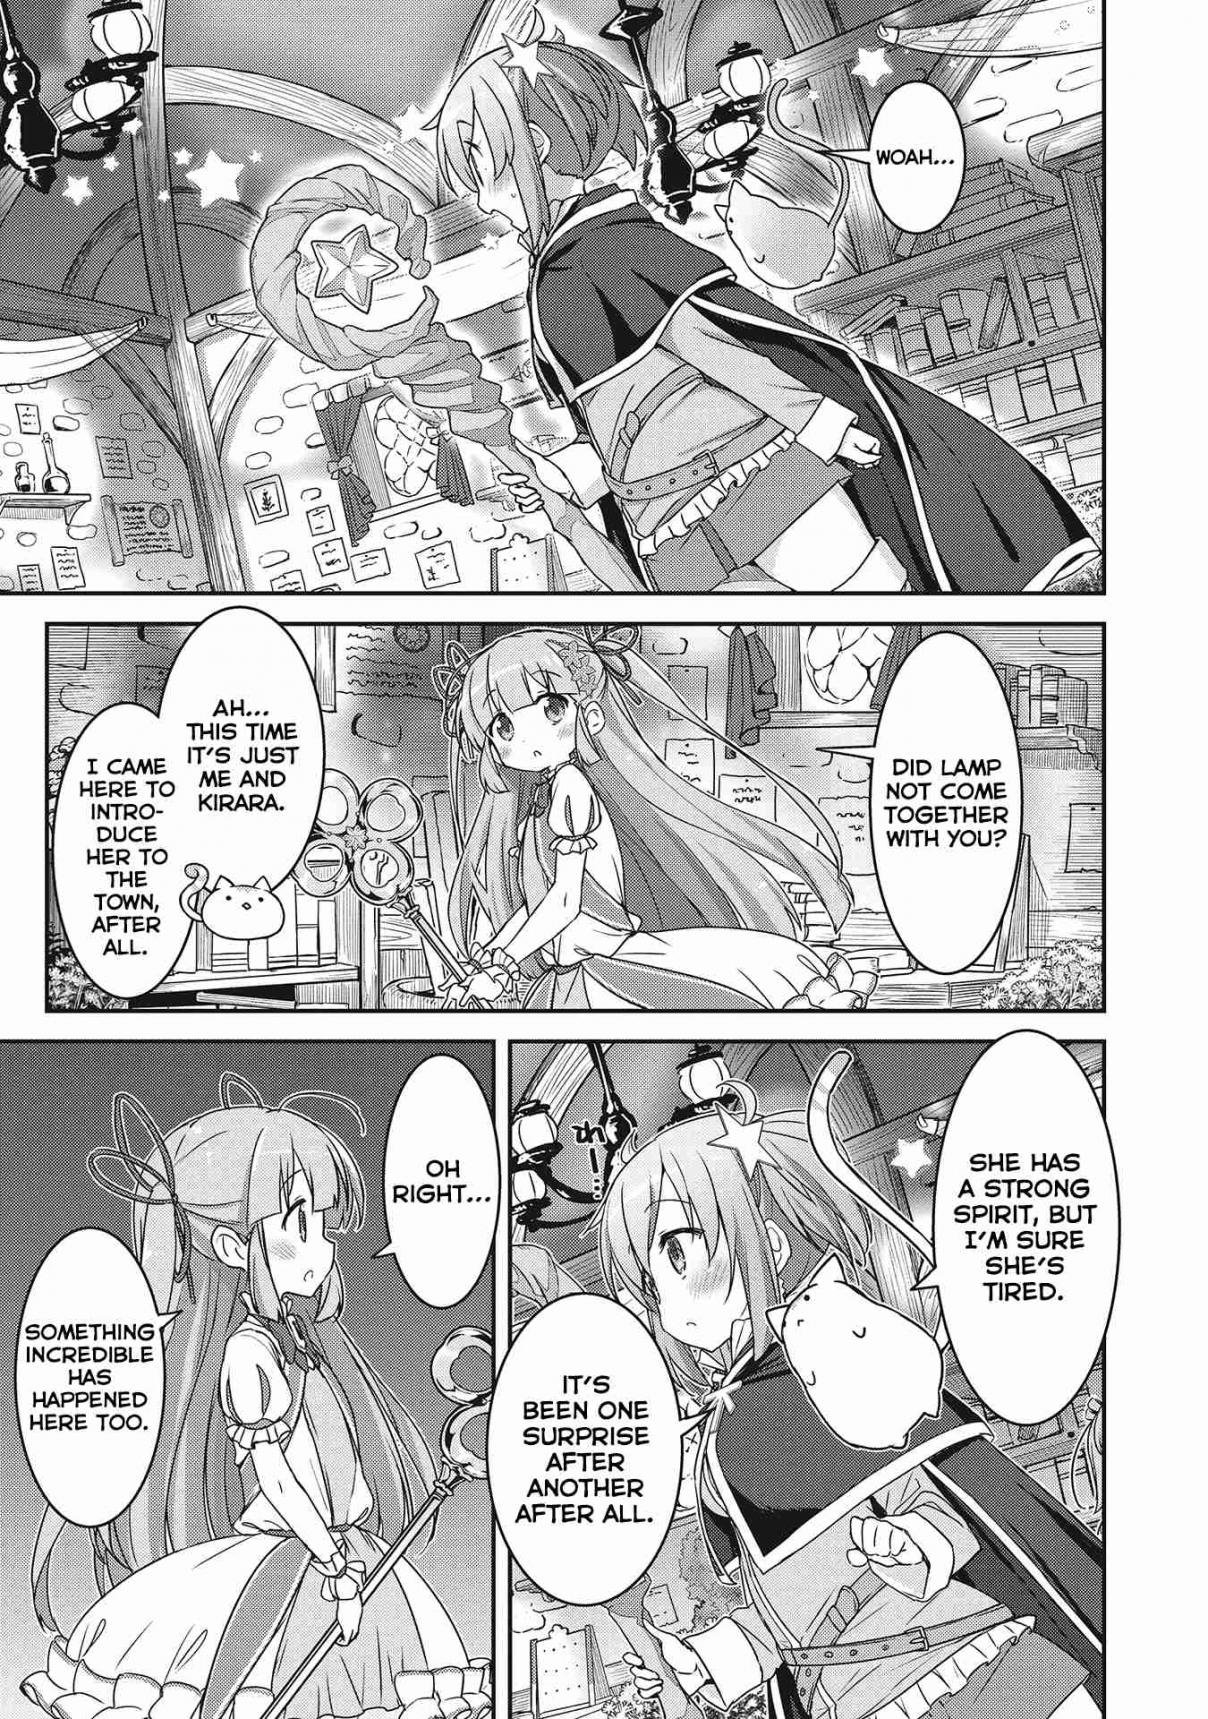 Kirara Fantasia Vol. 1 Ch. 3 Let's look for Hiro and the rest!